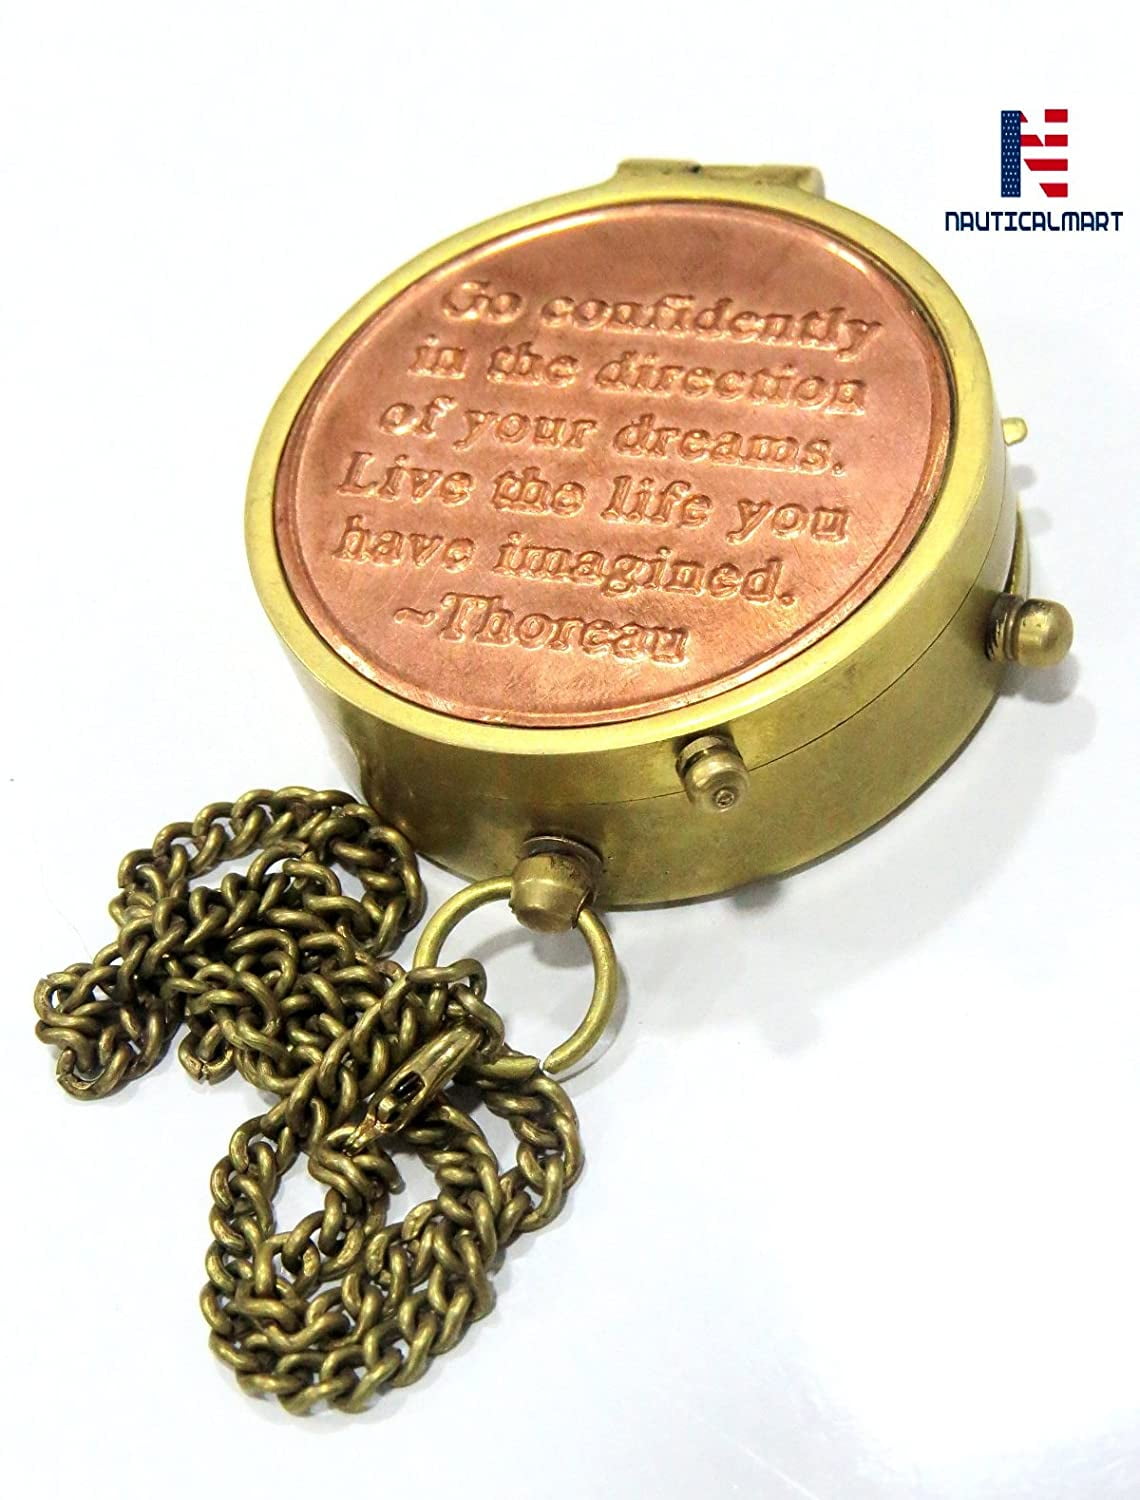 Details about   Thoreau's Go Confidently Quote Engraved Brass Compass With Stamped Leather Case 